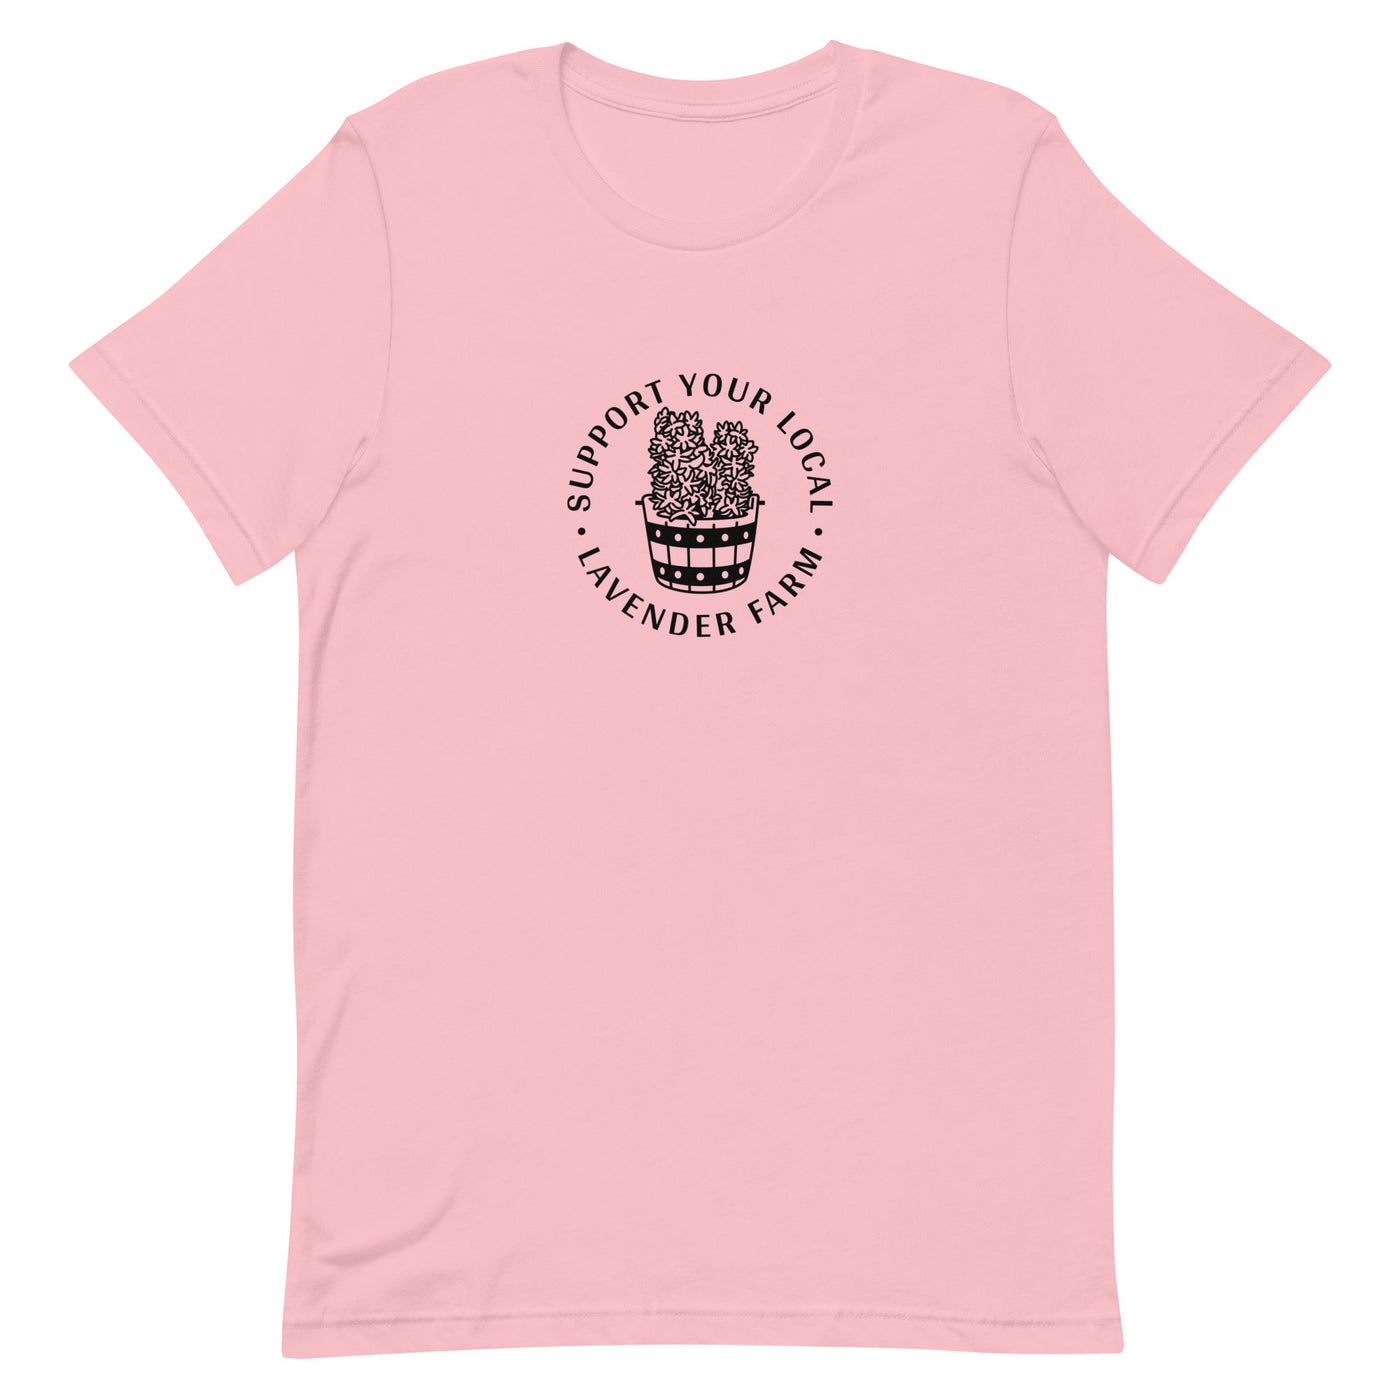 Lavender Farm | Short-Sleeve Unisex T-Shirt | Animal Crossing Threads and Thistles Inventory Pink S 